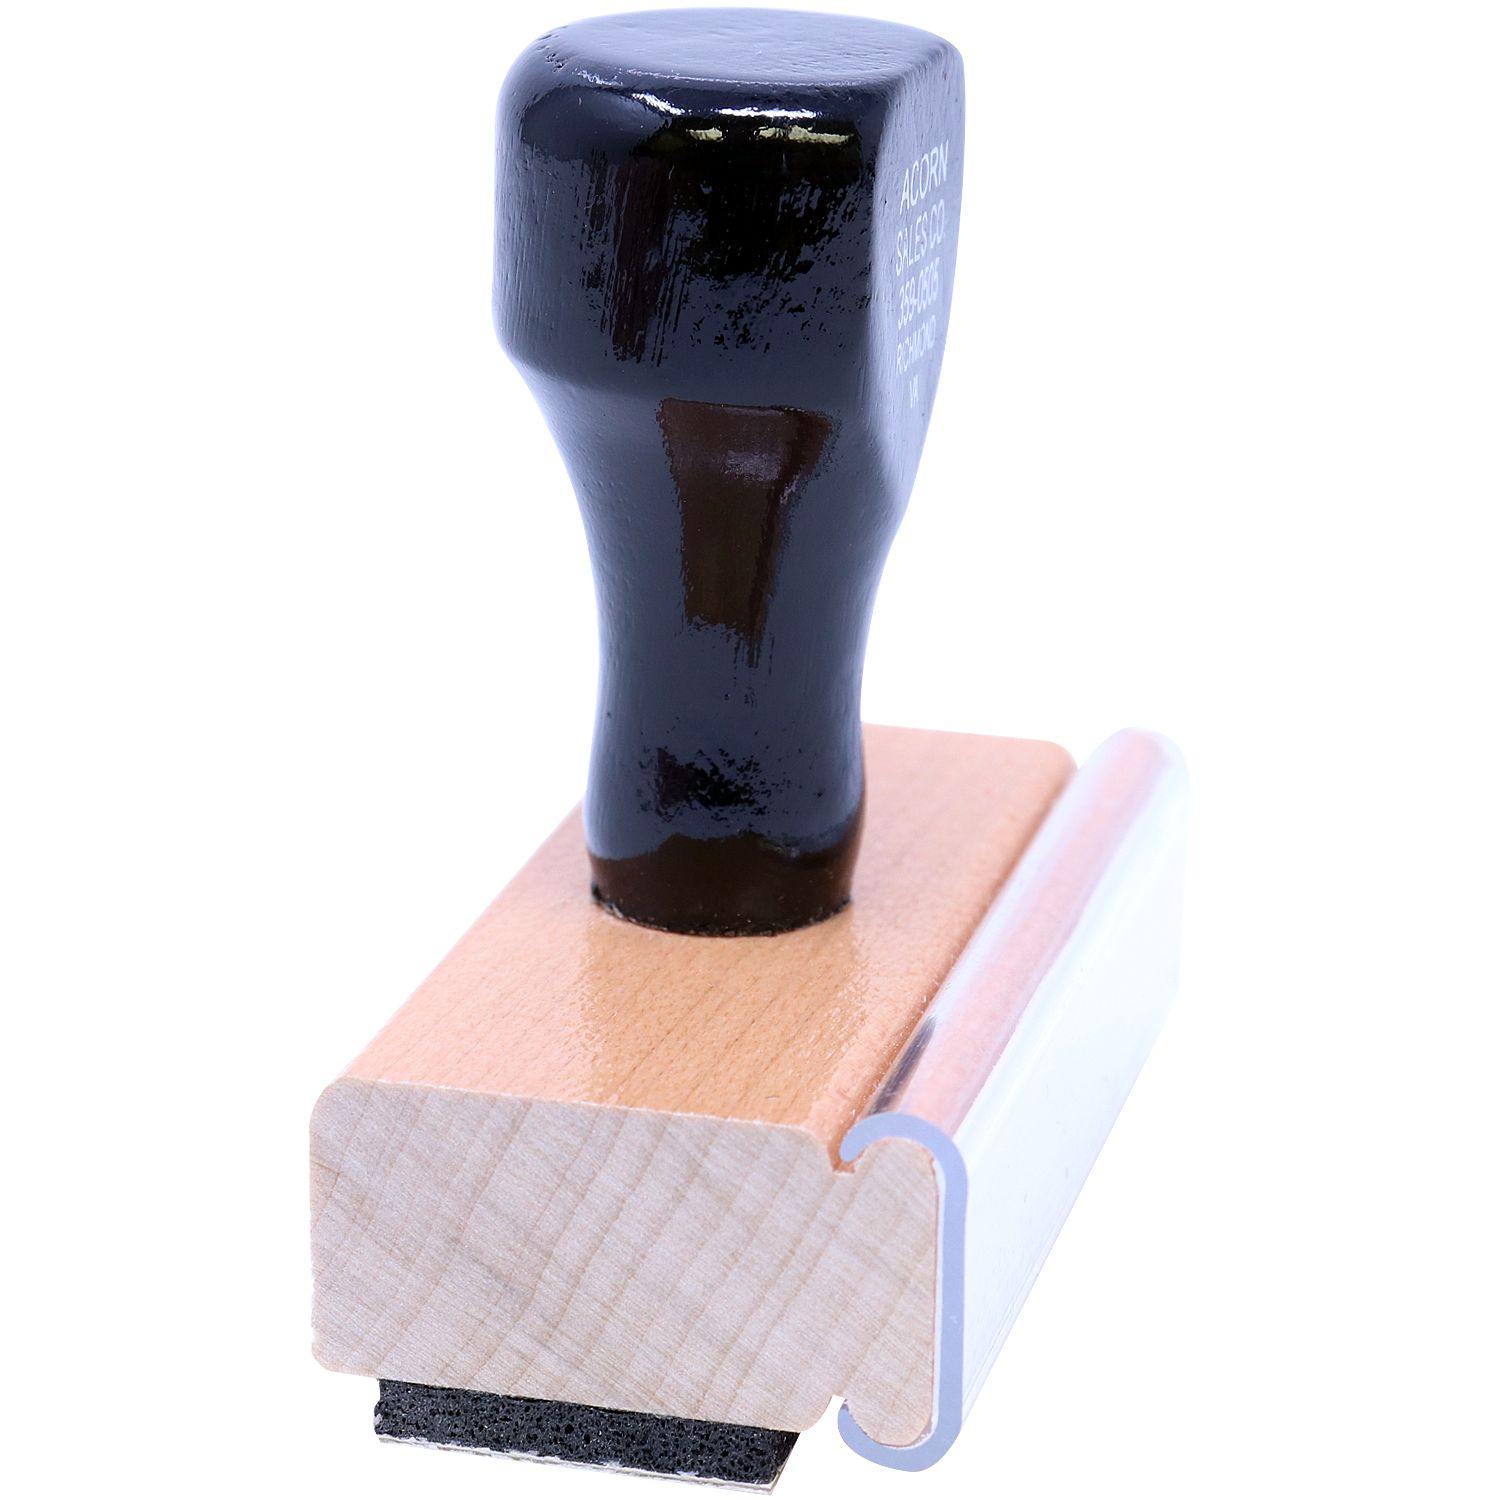 Side View of Bravo Rubber Stamp at an Angle